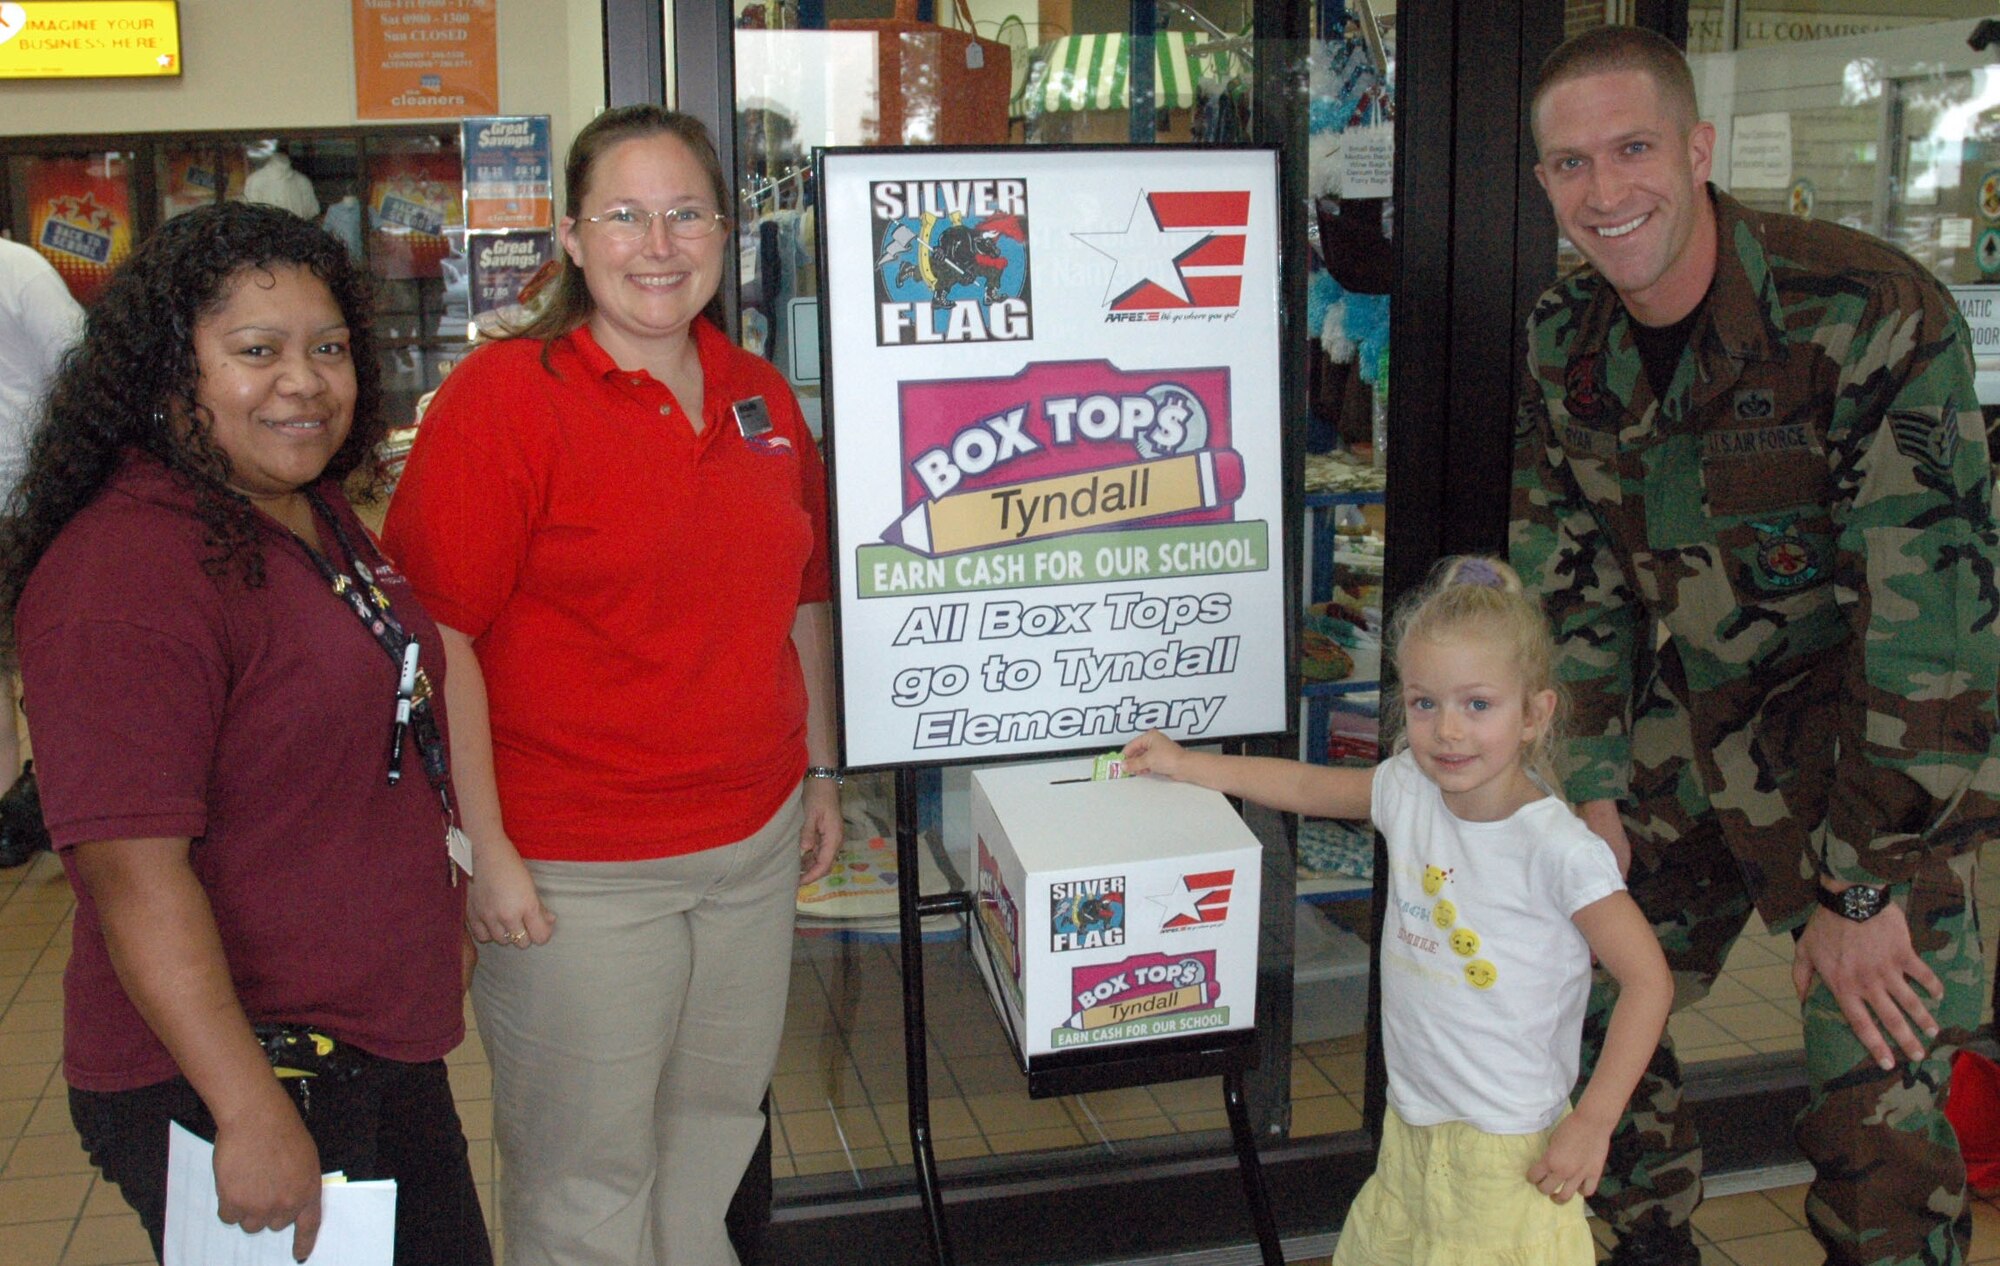 Staff Sgt. Thomas T. Ryan, a Fire Contingency Instructor for Det. 1 823rd Red Horse Squadron,  his daughter Caitlyn A. Ryan,  and AAFES team together to raise money for Tyndall Elementary through the Box Tops for Education project.  Each box top earns the school ten cents toward supplies. The box tops can be found on an array of products, from cereal to trash bags. The drop box can be found right inside the entrance of the BX. (U.S. photo by/Airman 1st Class Rachelle Elsea)